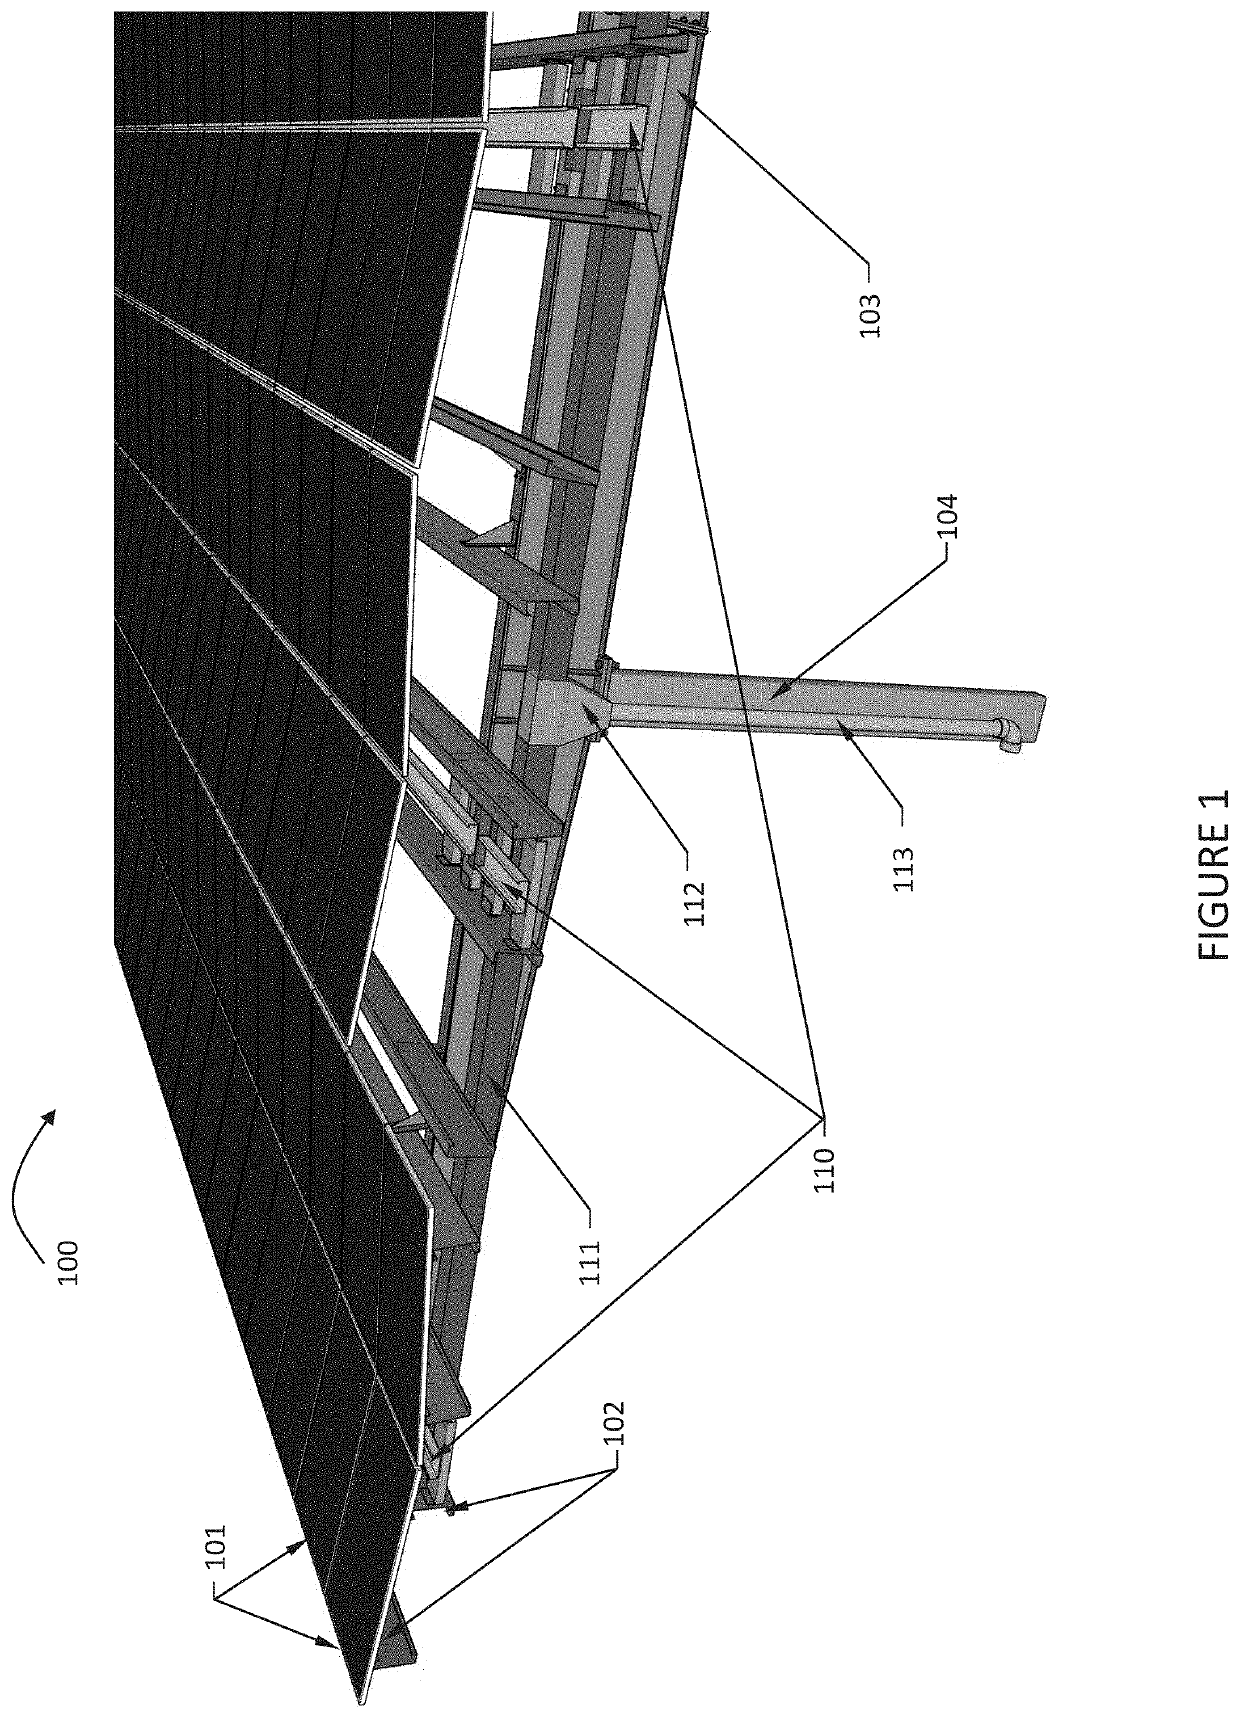 Solar carport and water management for solar carports and canopies